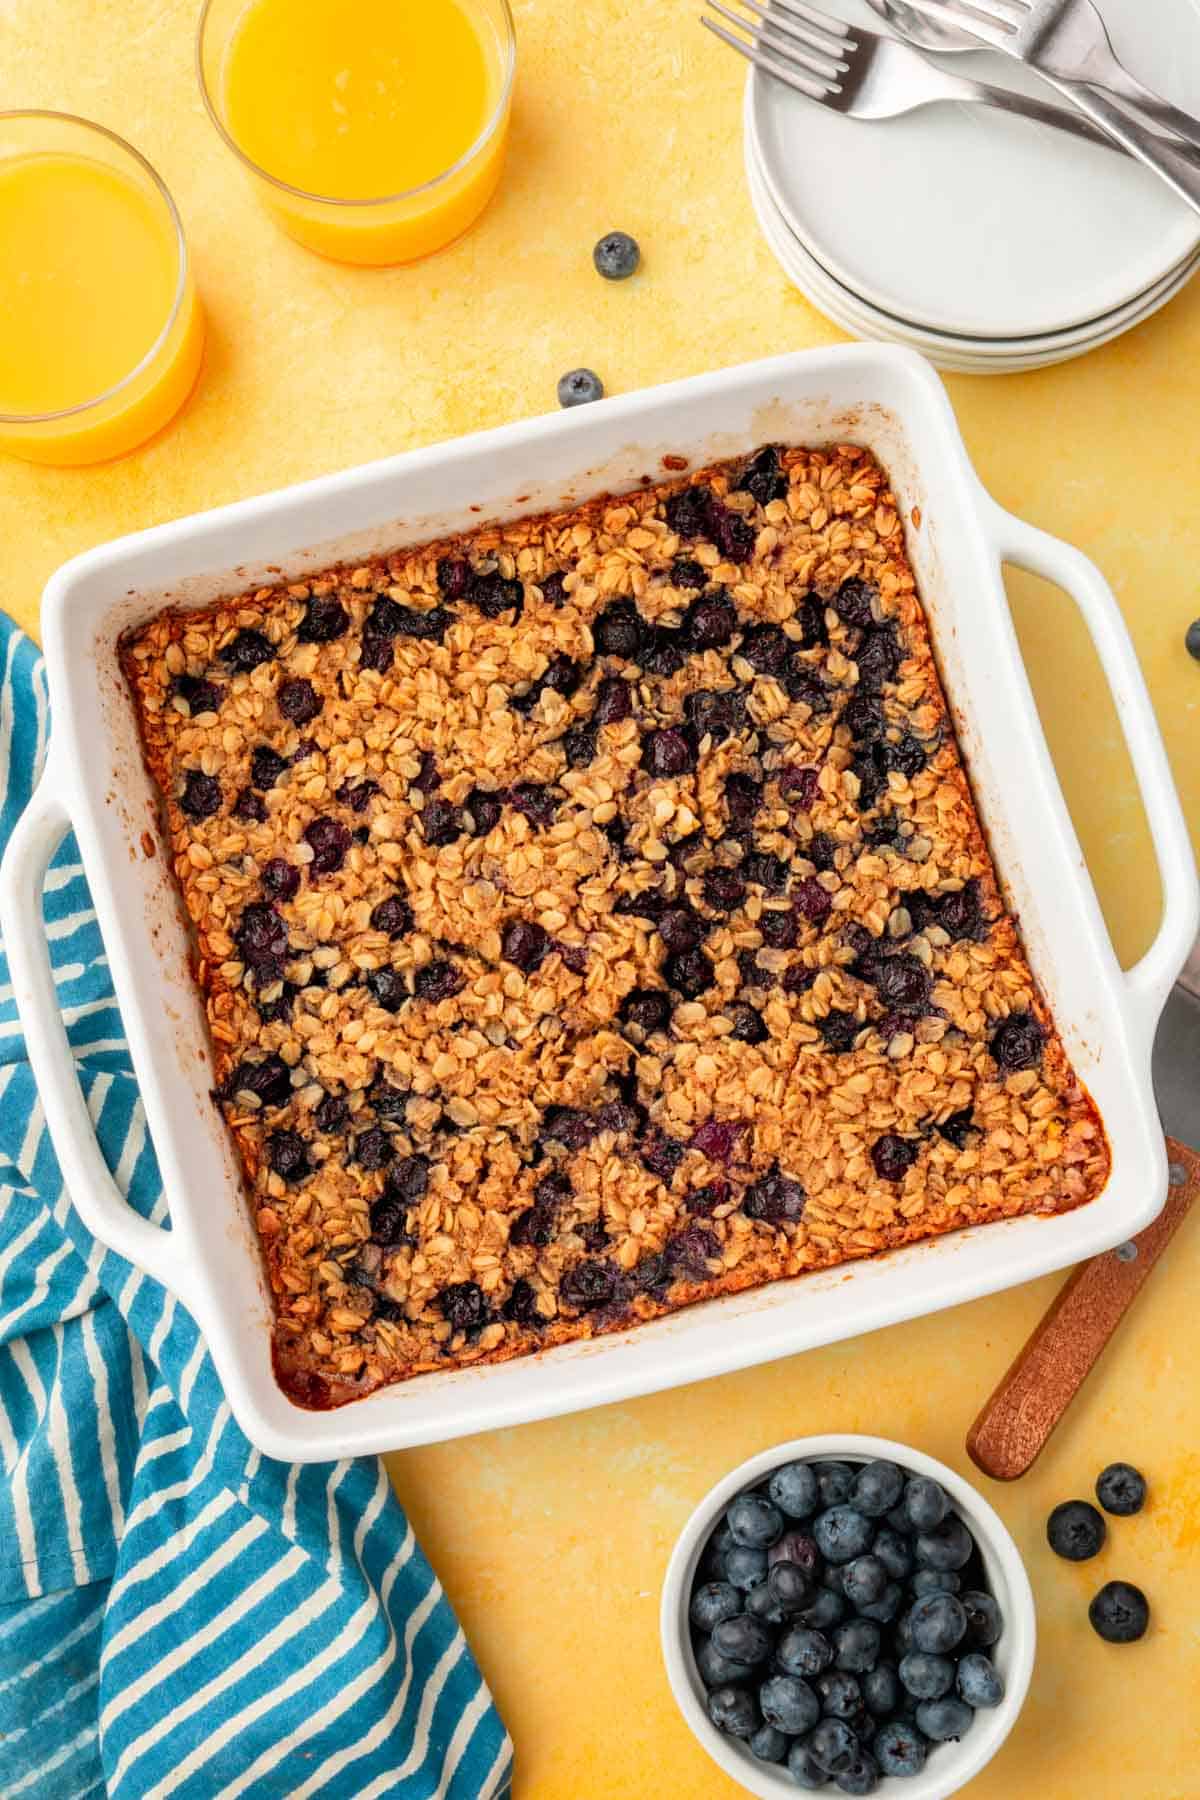 An overhead view of a baking dish with blueberry baked oatmeal in it with two glasses of orange juice and a bowl of blueberries on the side.